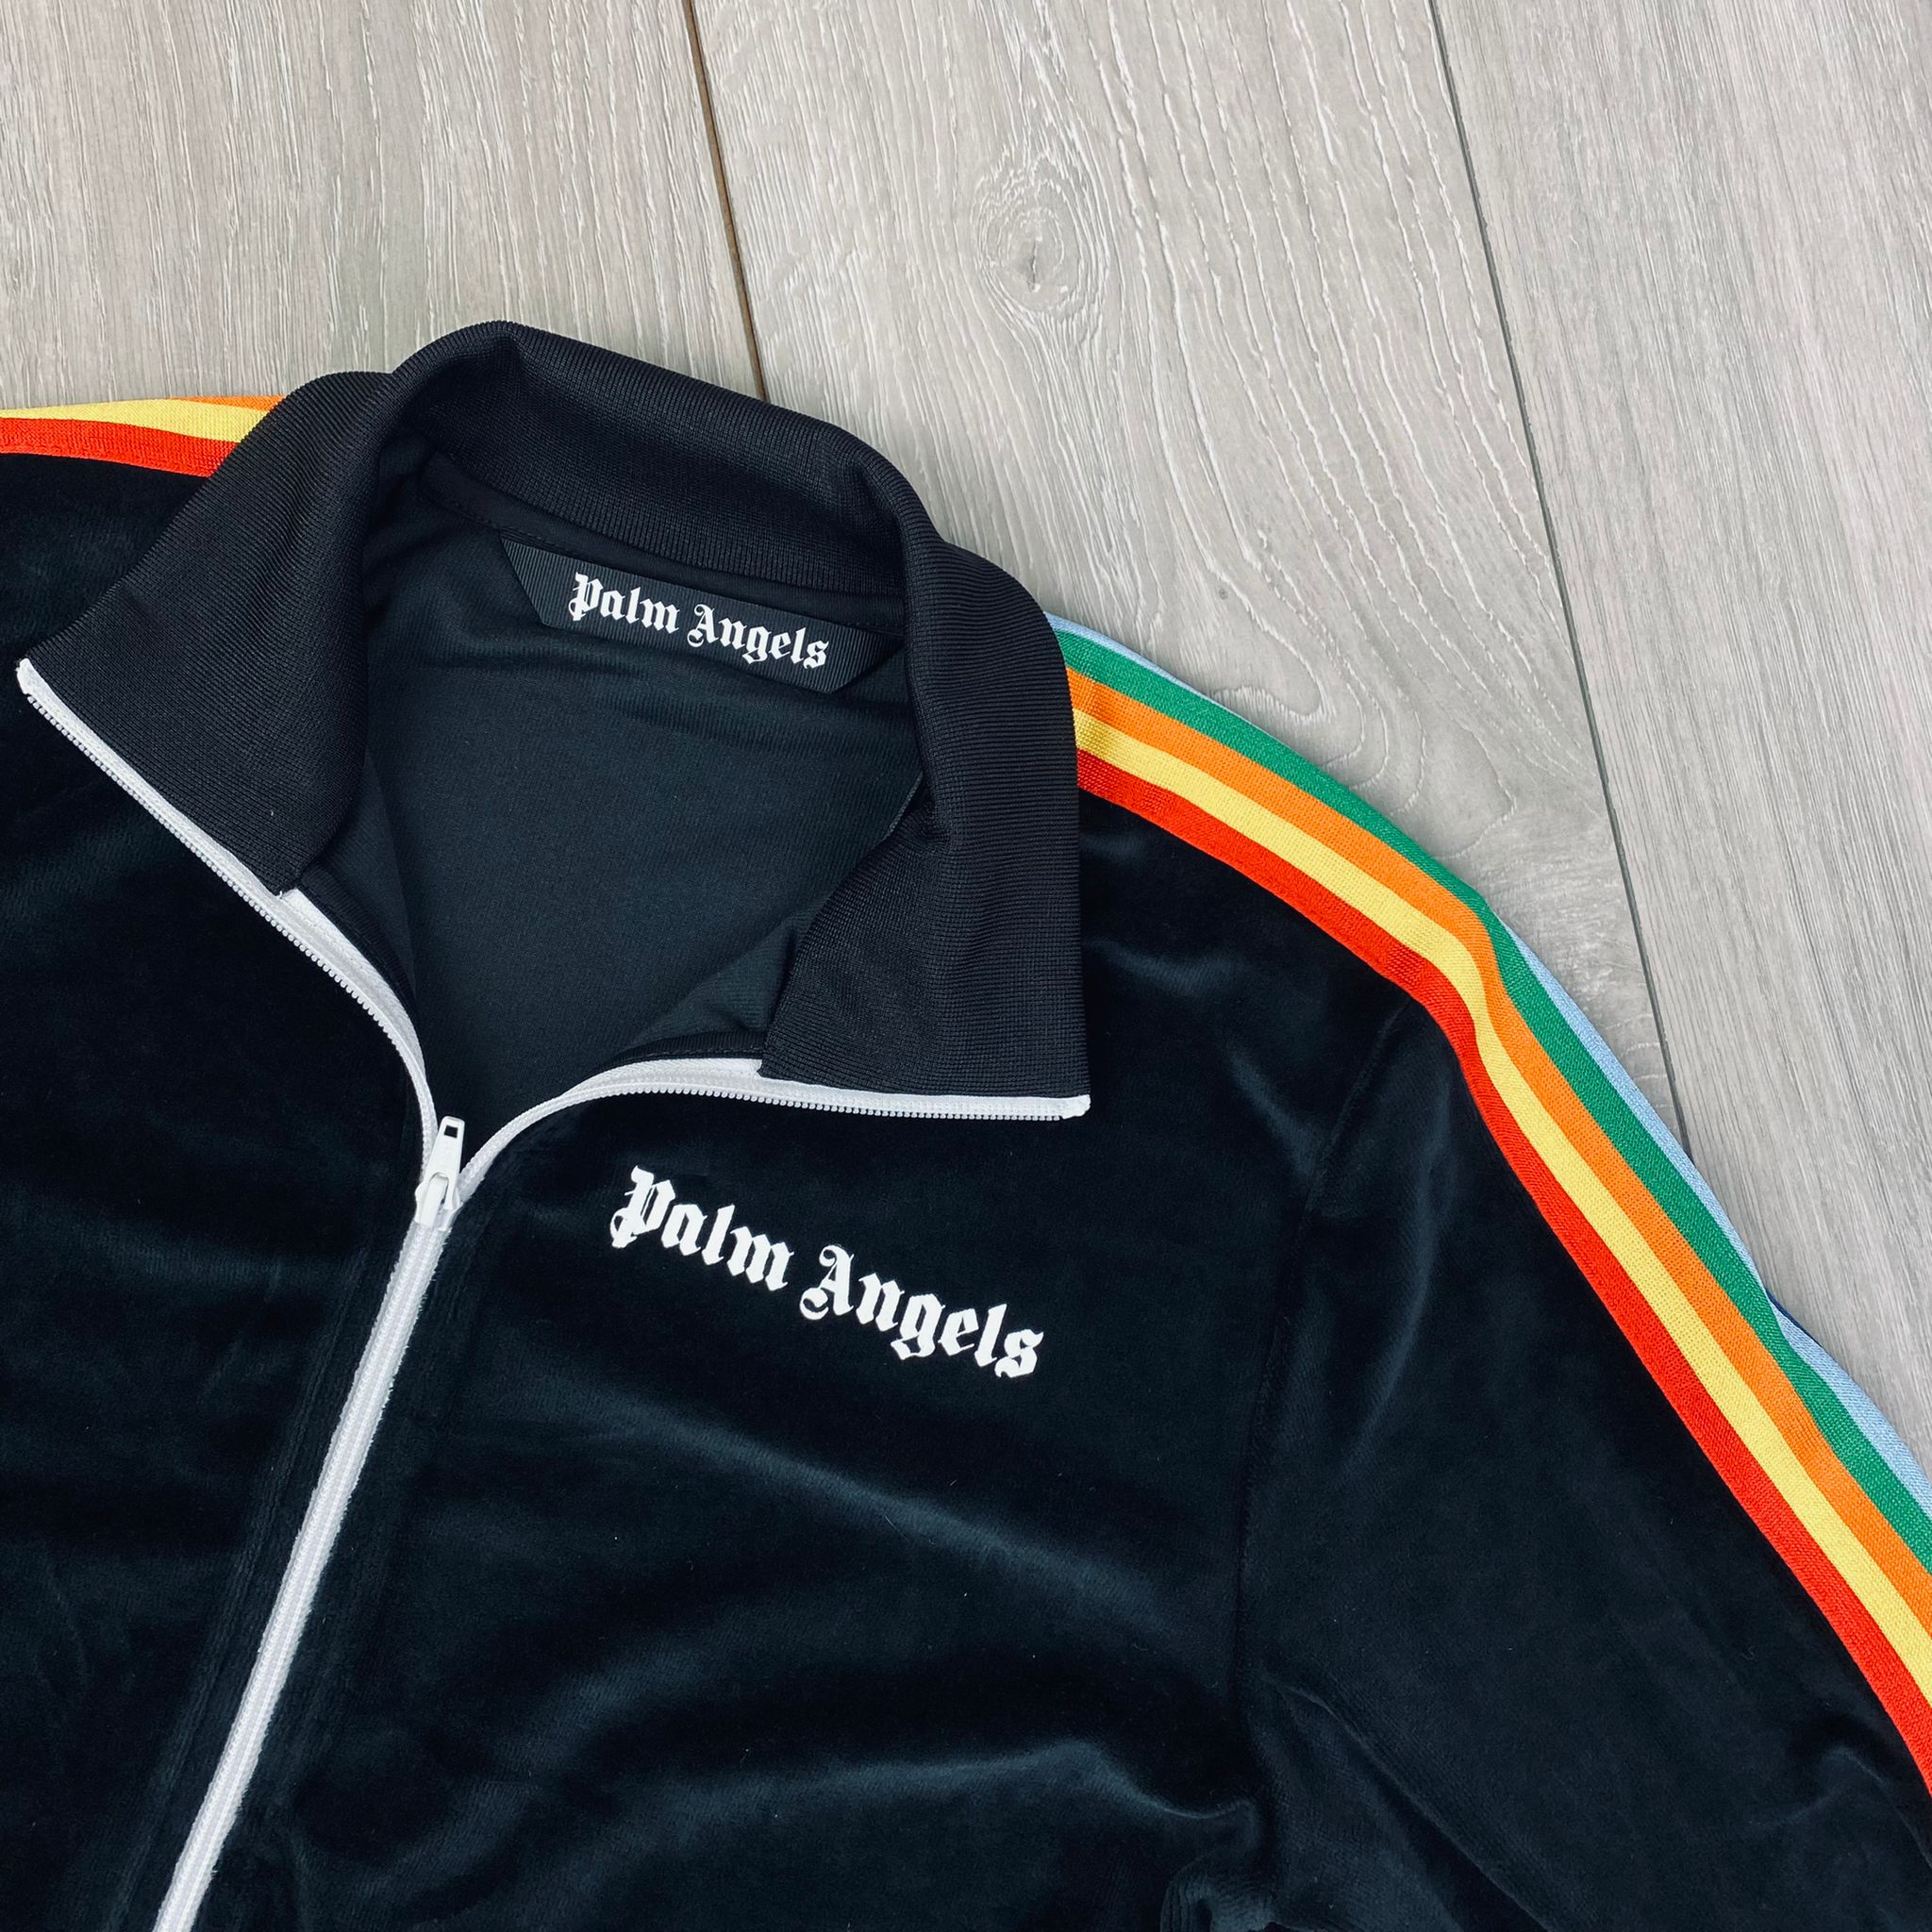 Palm Angels Chenille Track Jacket